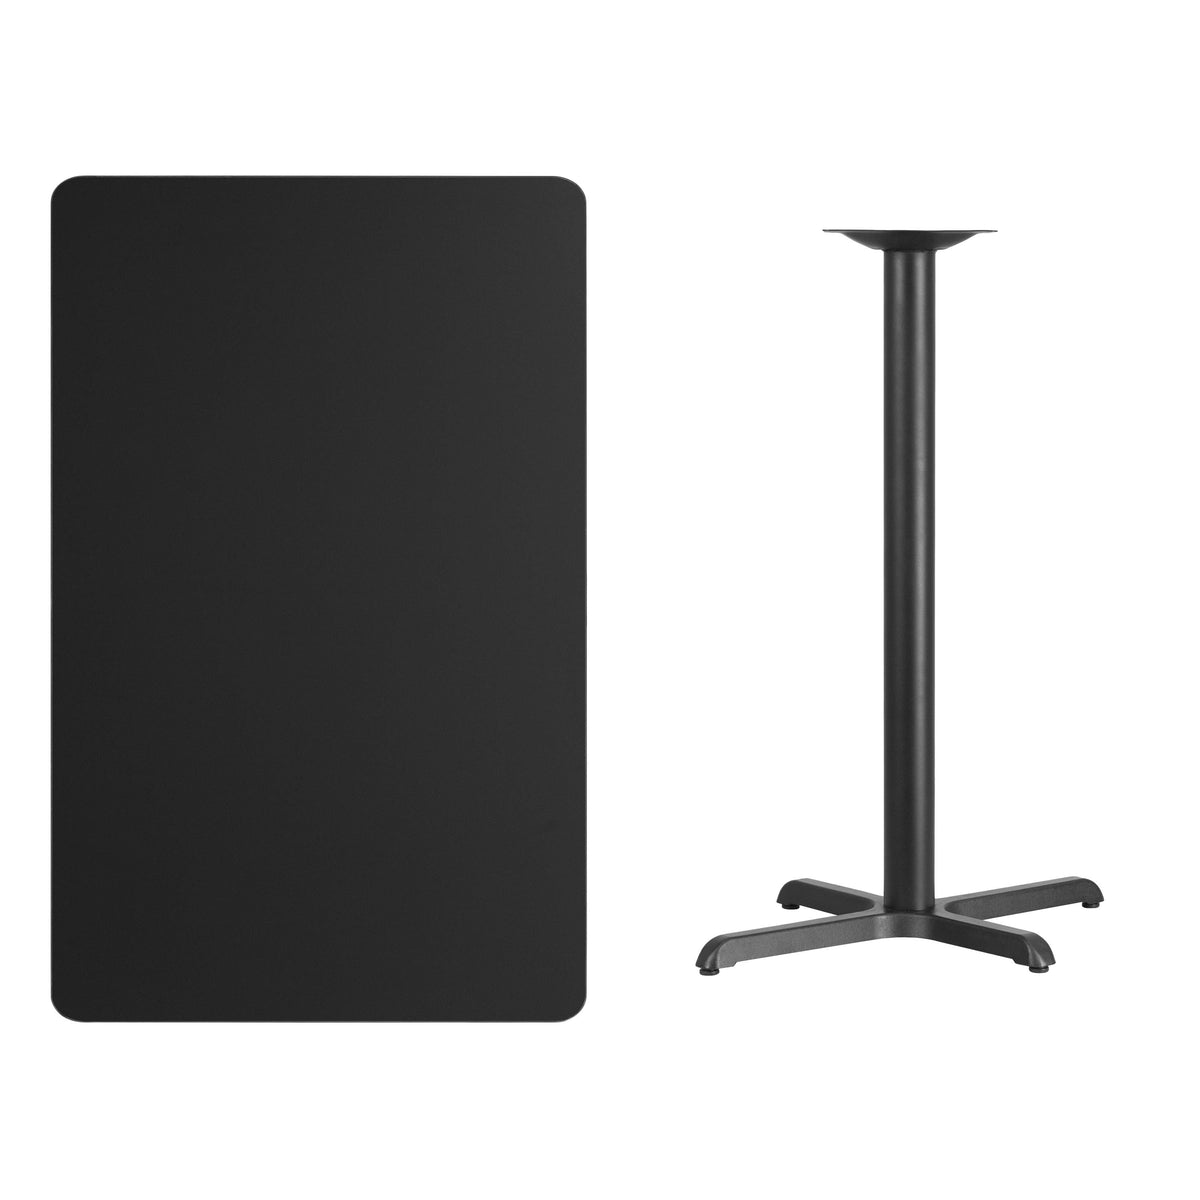 Black |#| 30inch x 48inch Rectangular Laminate Table Top & 23.5inch x 29.5inch Bar Height Table Base